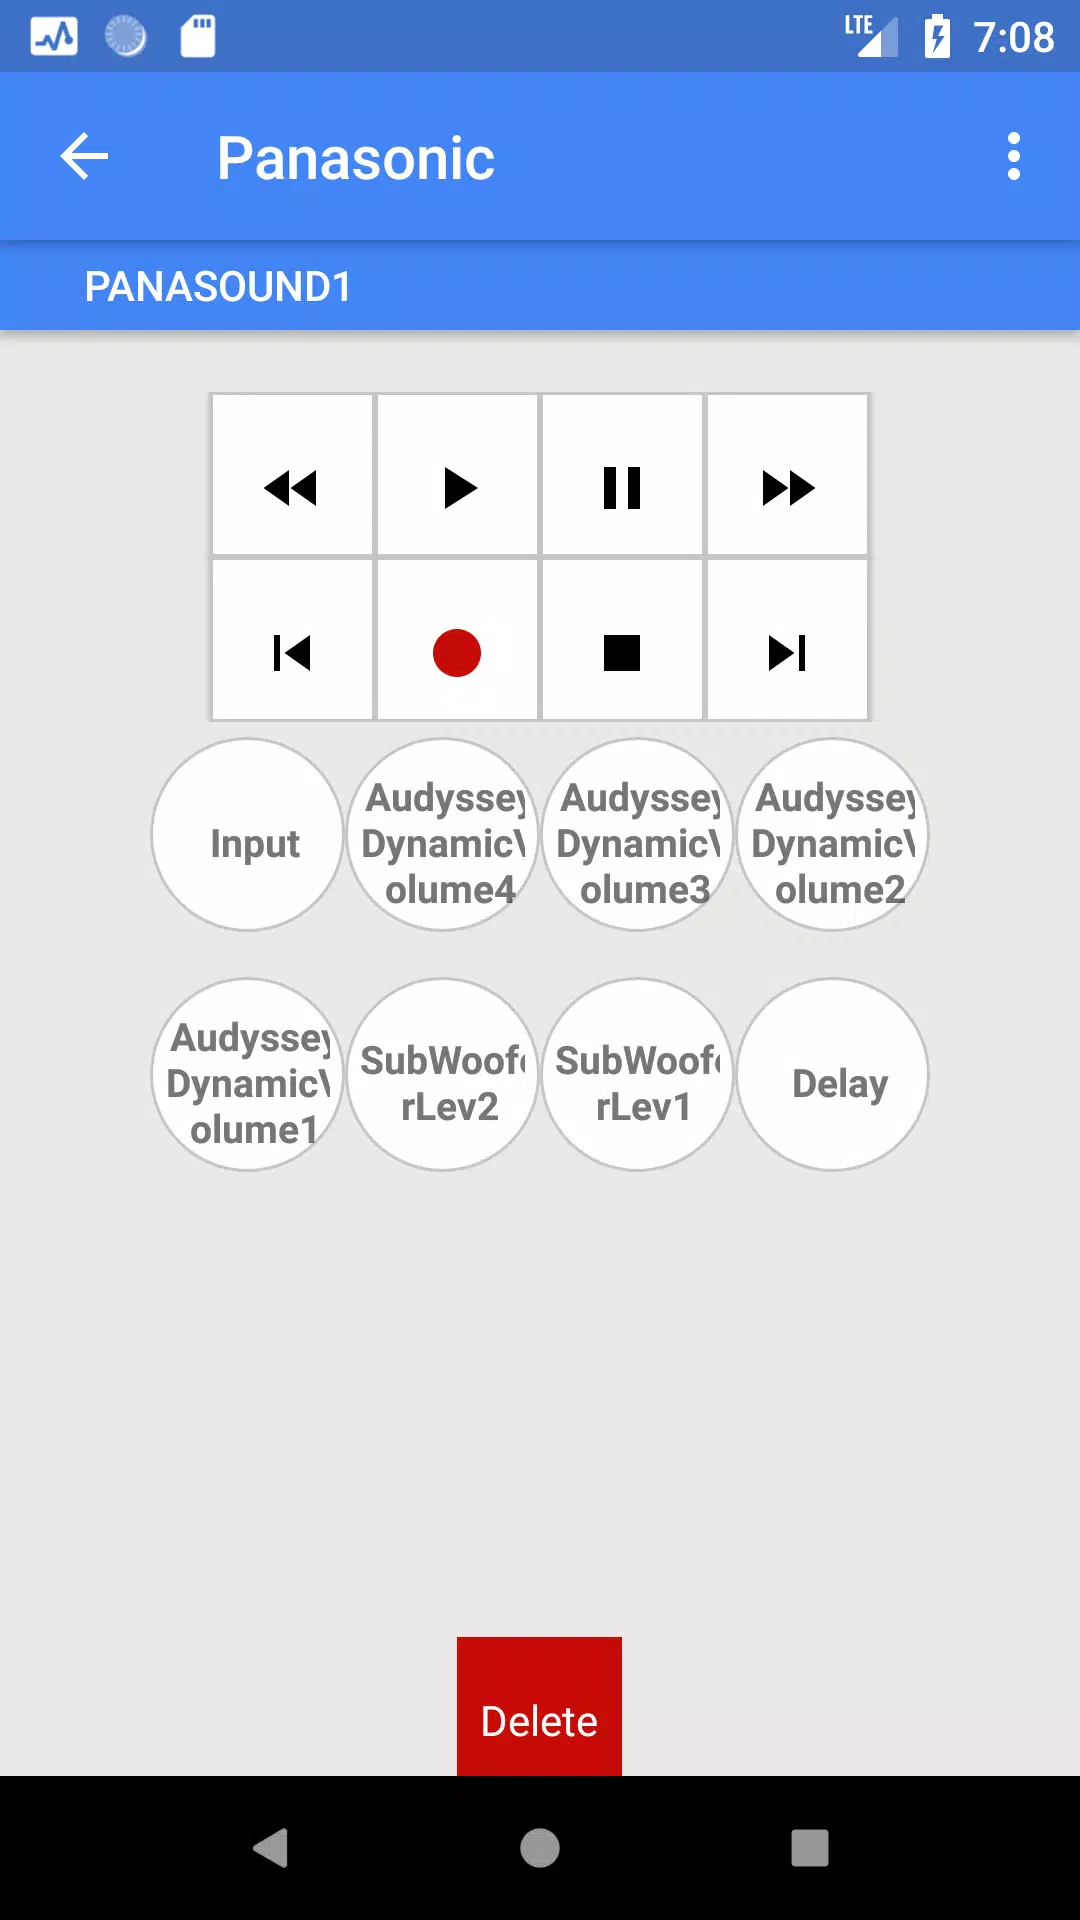 Panasonic Sound Bar Remote for Android - APK Download